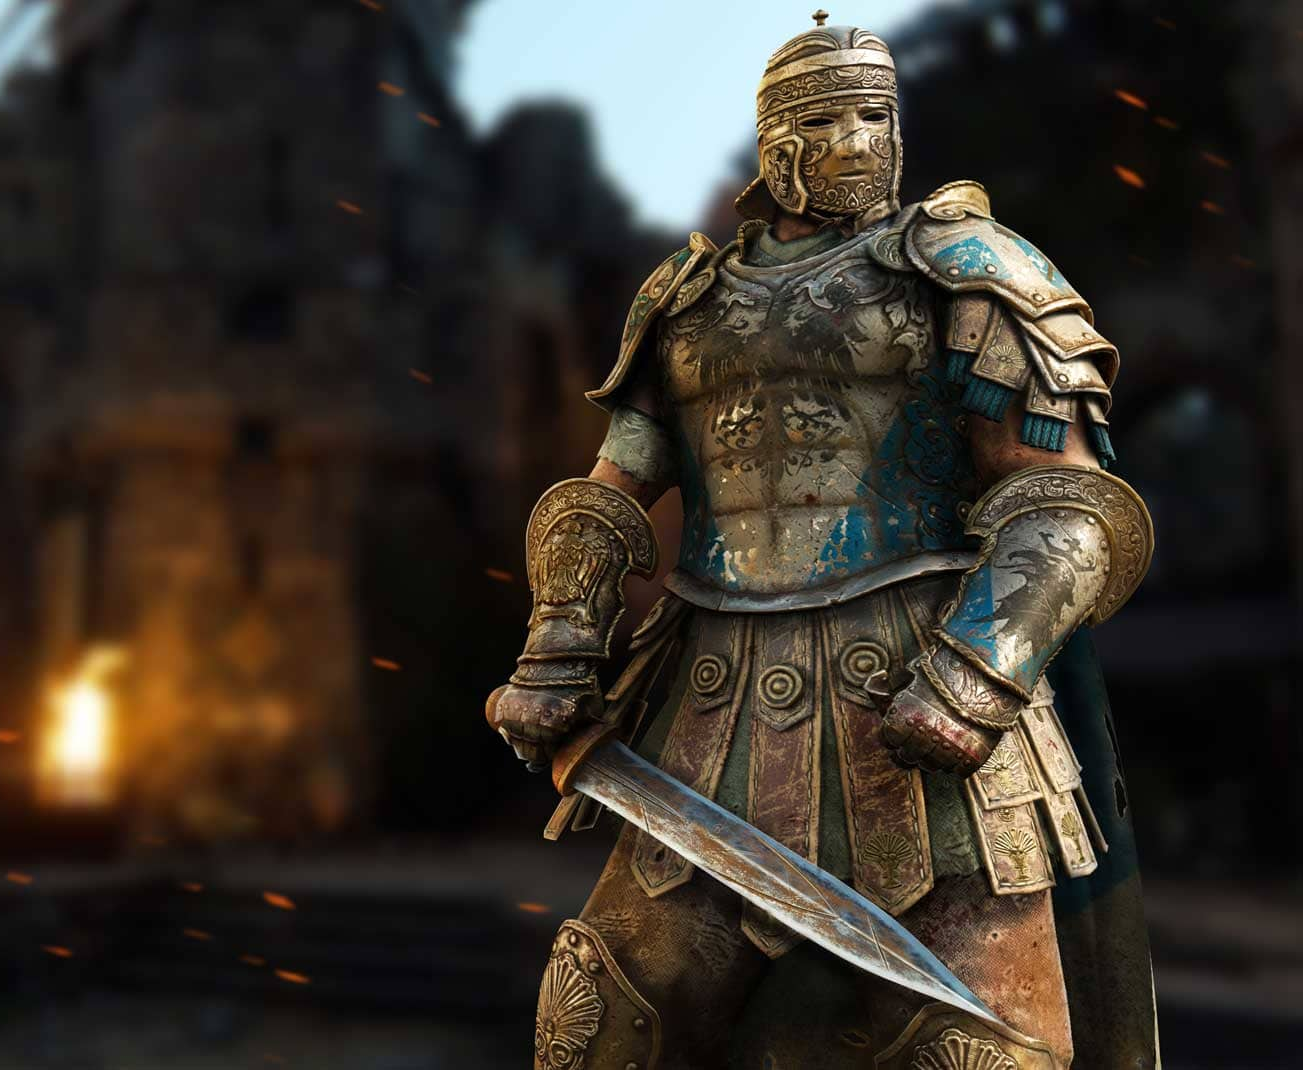 centurion for honor download